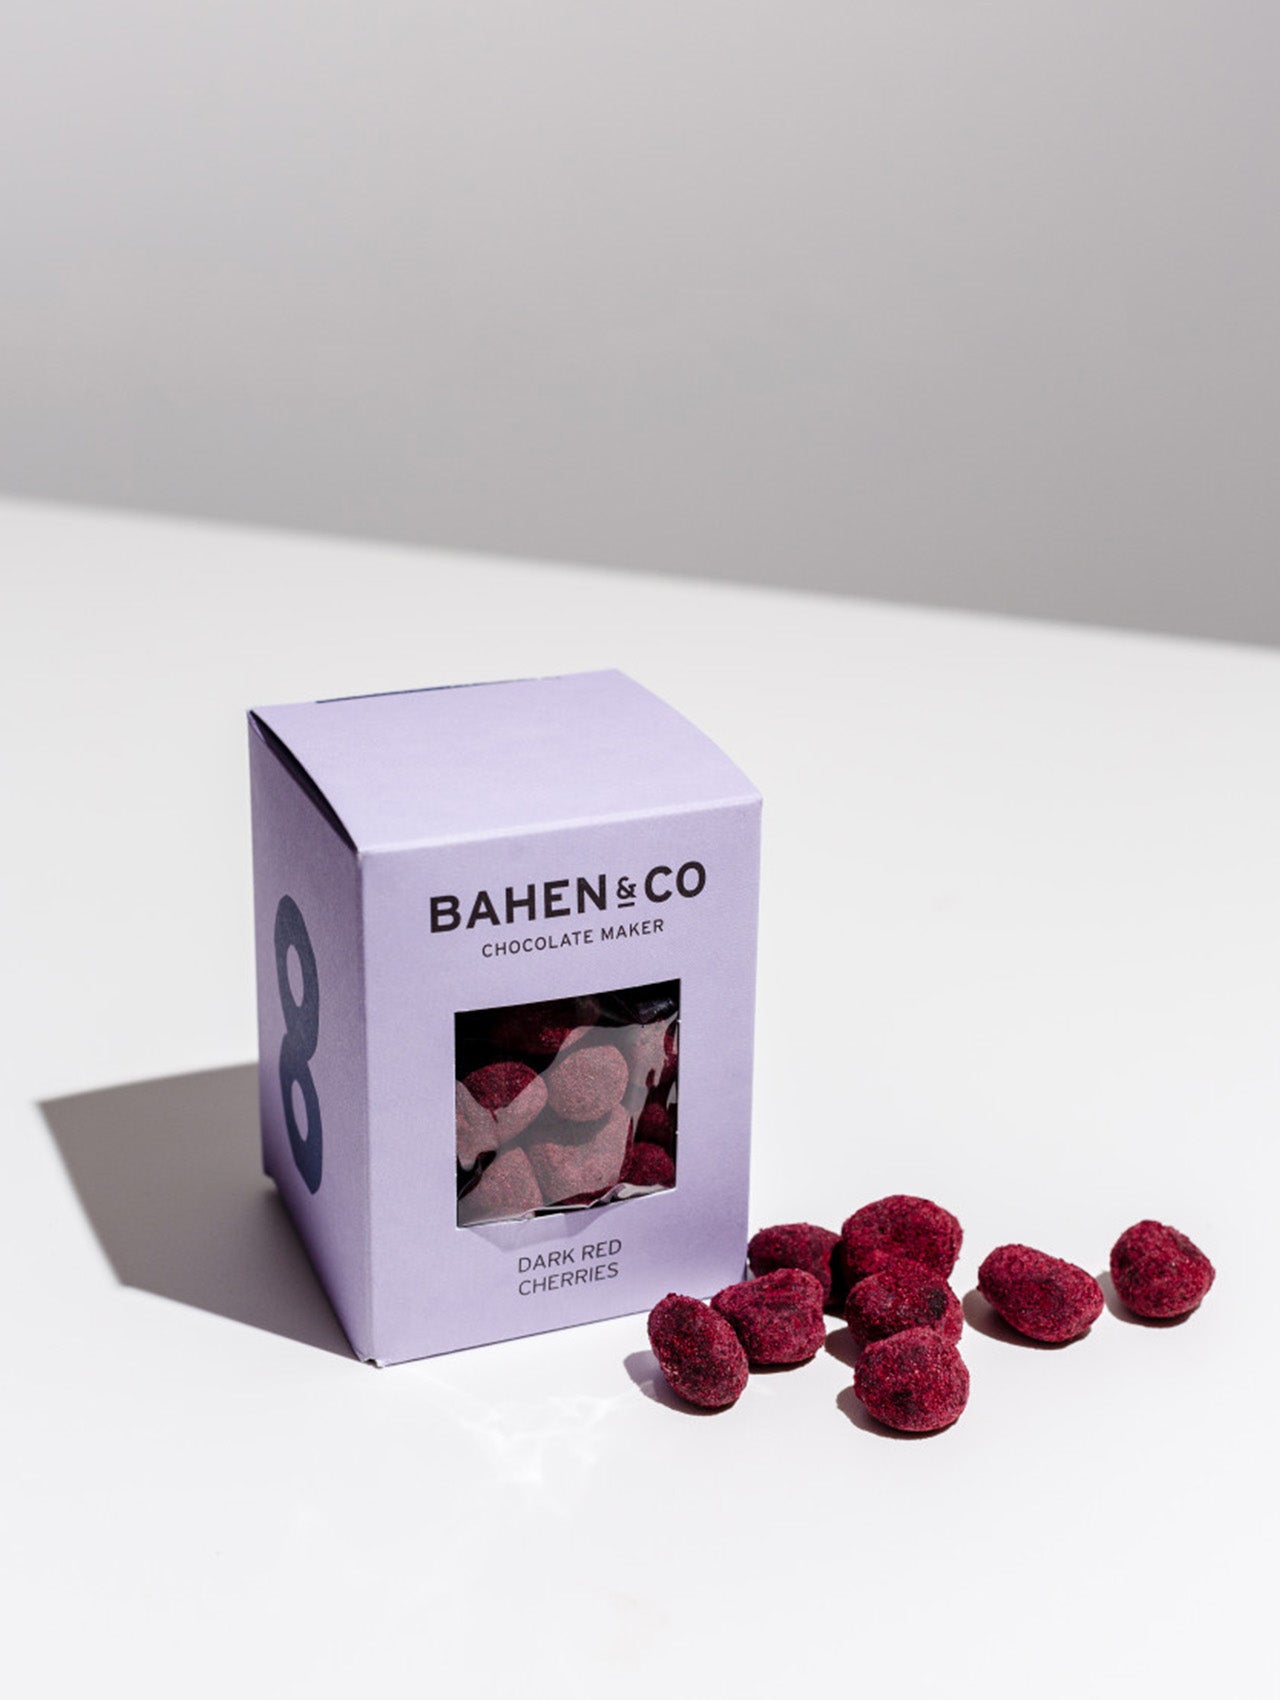 Bahen & Co Chocolate Covered Cherries